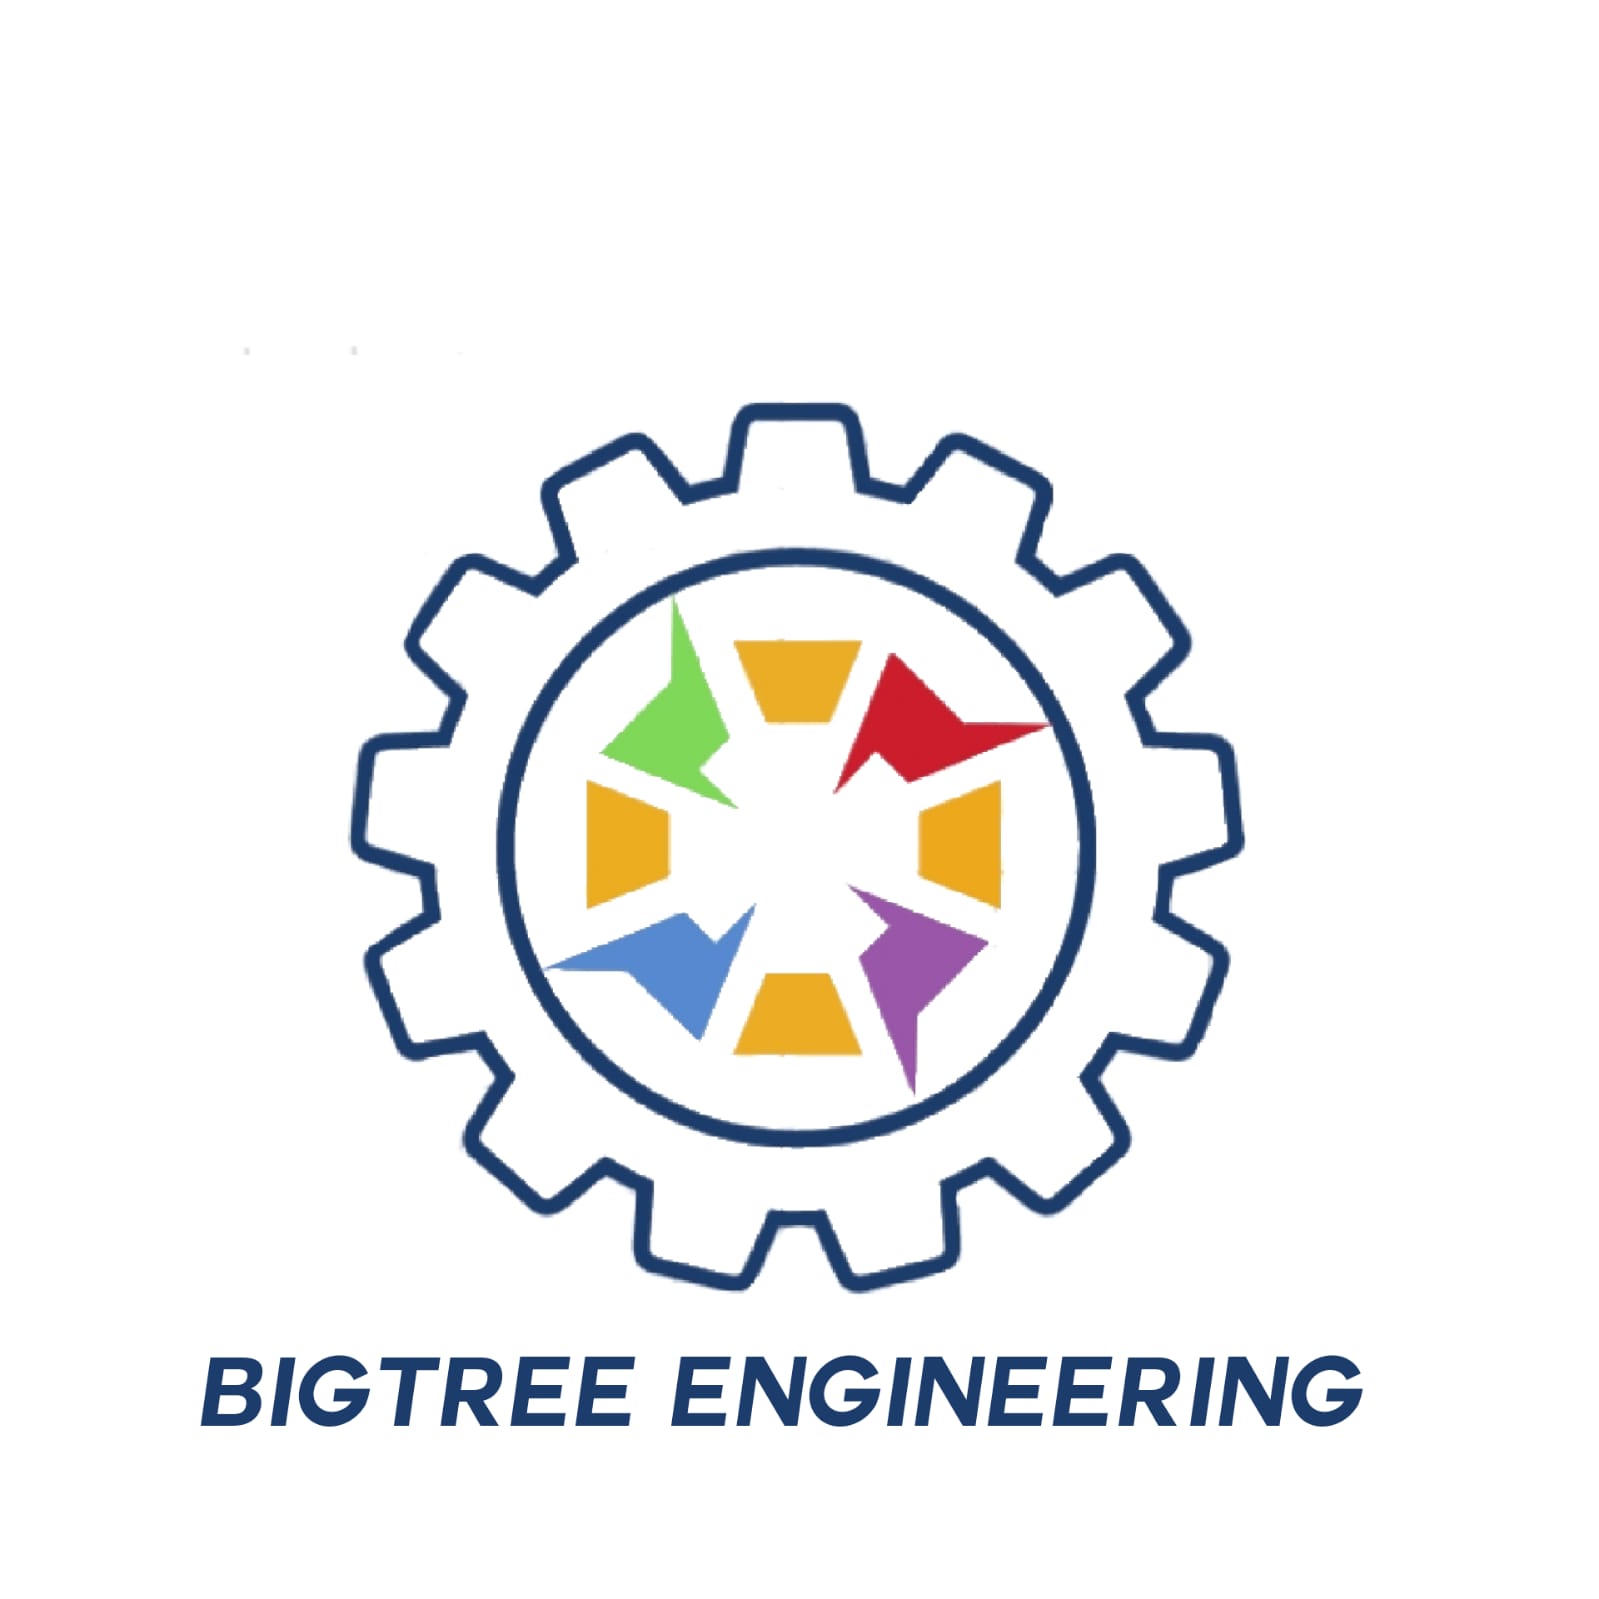 Bigtree Engineering Services Pte. Ltd. company logo